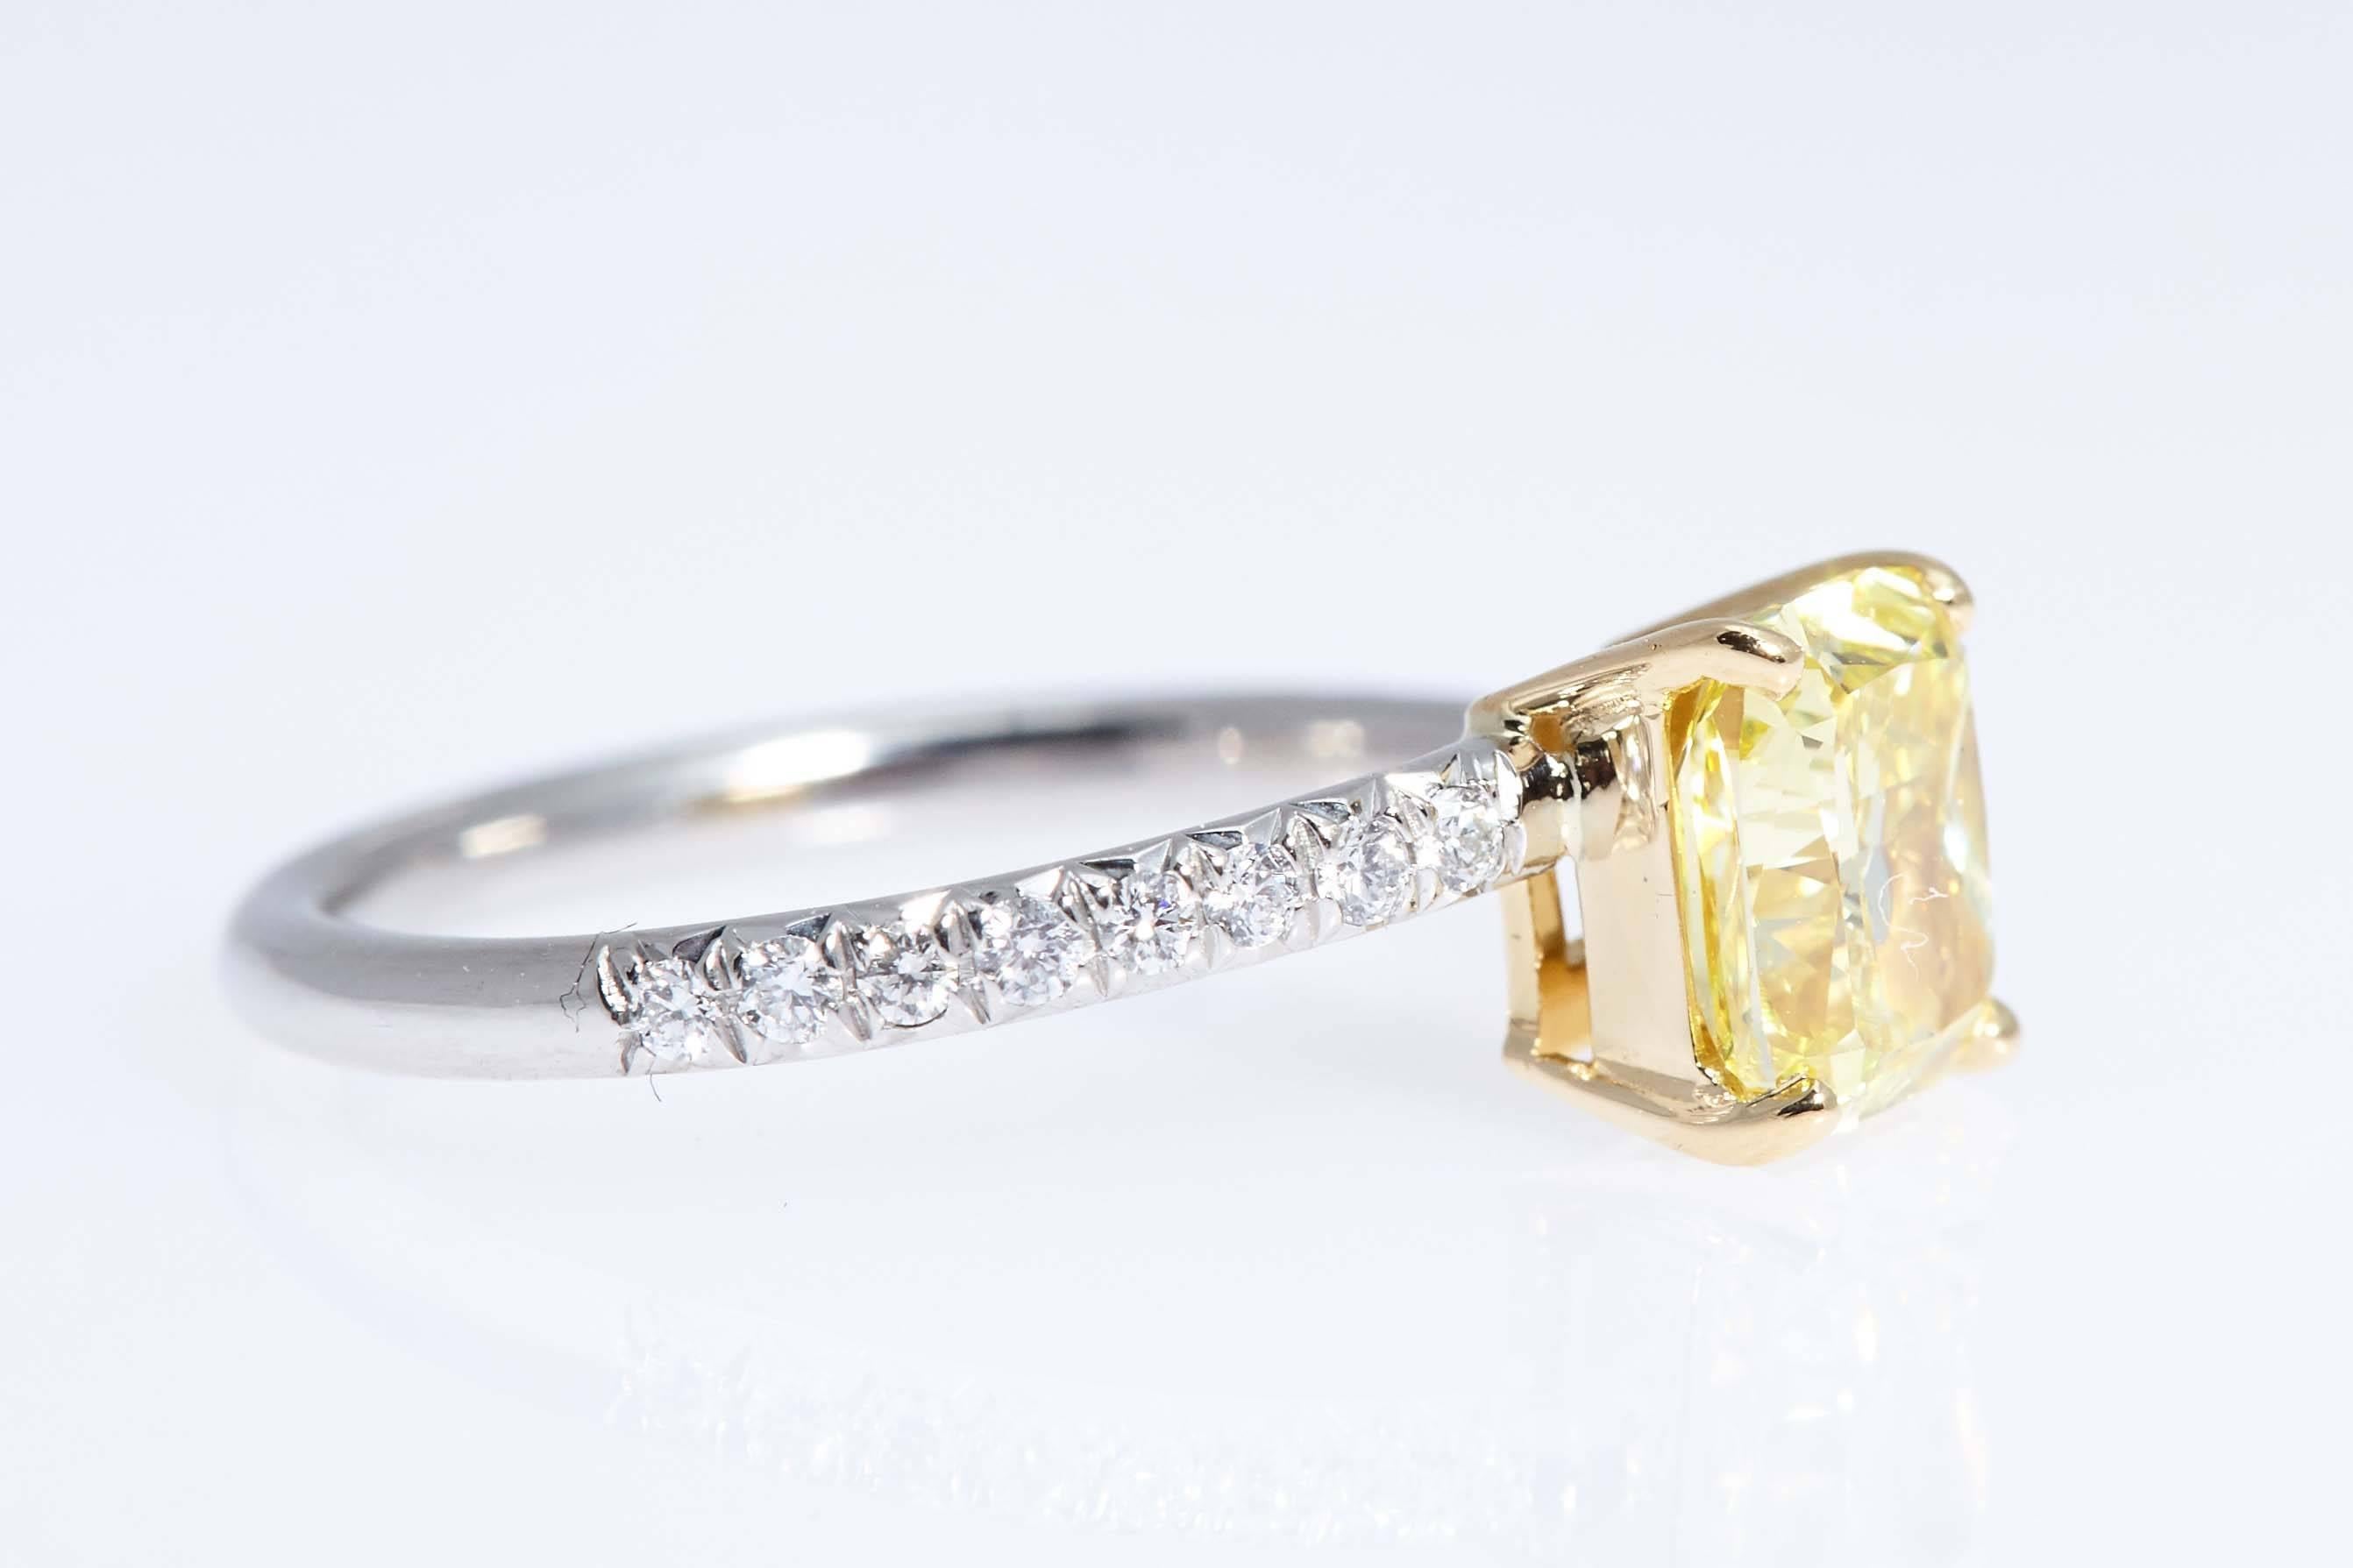 Vivid Yellow color and "VS1" clarity cushion shaped diamond weighing 1.39 carats graded by the Gemological Institute of America.  The center is mounted in platinum and 18 karat yellow gold ring. The ring is special in that the shank is off